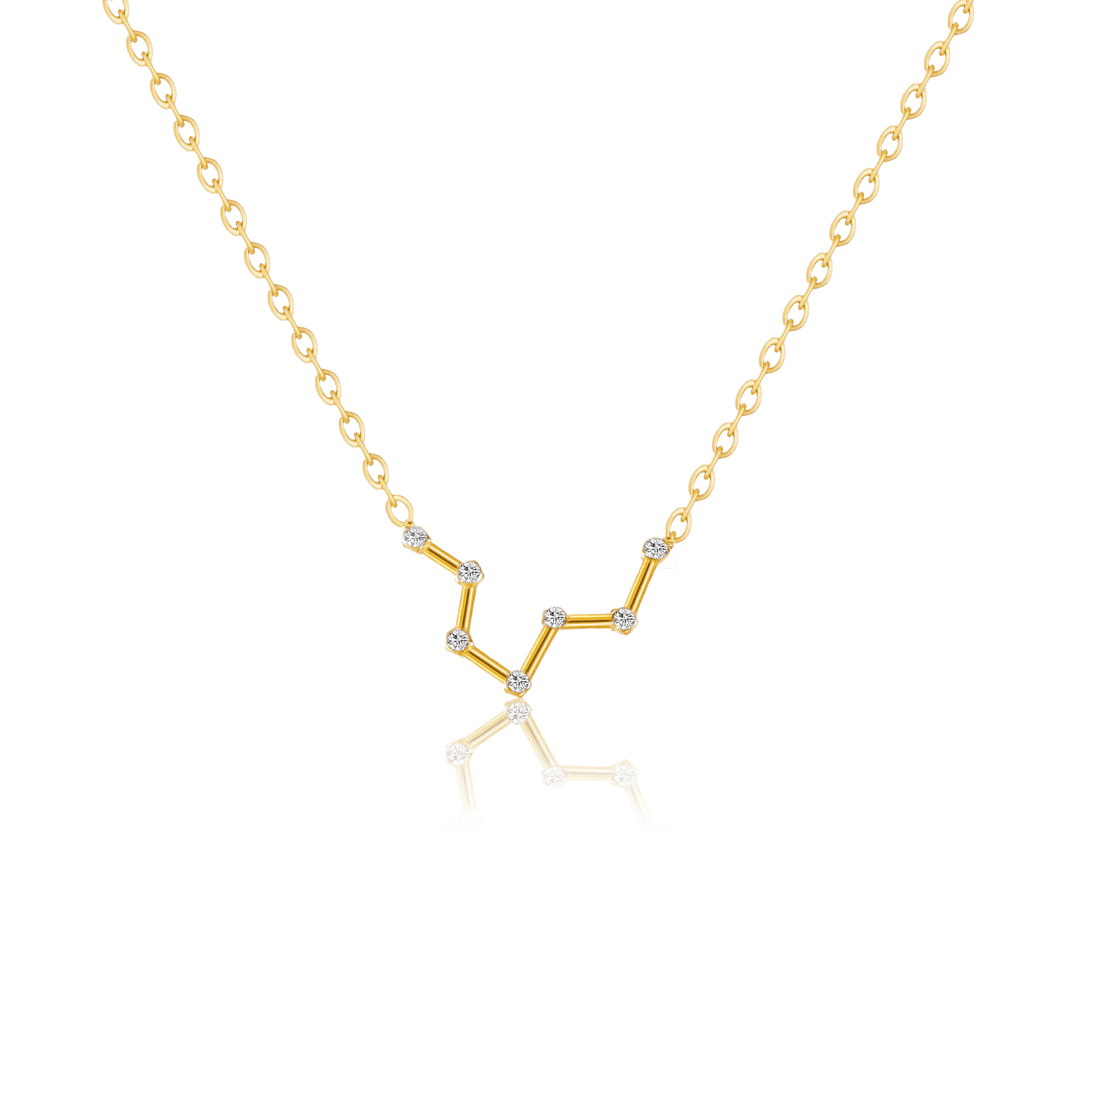 bianco rosso Necklaces Pisces Zircon Gold Necklace cyprus greece jewelry gift free shipping europe worldwide